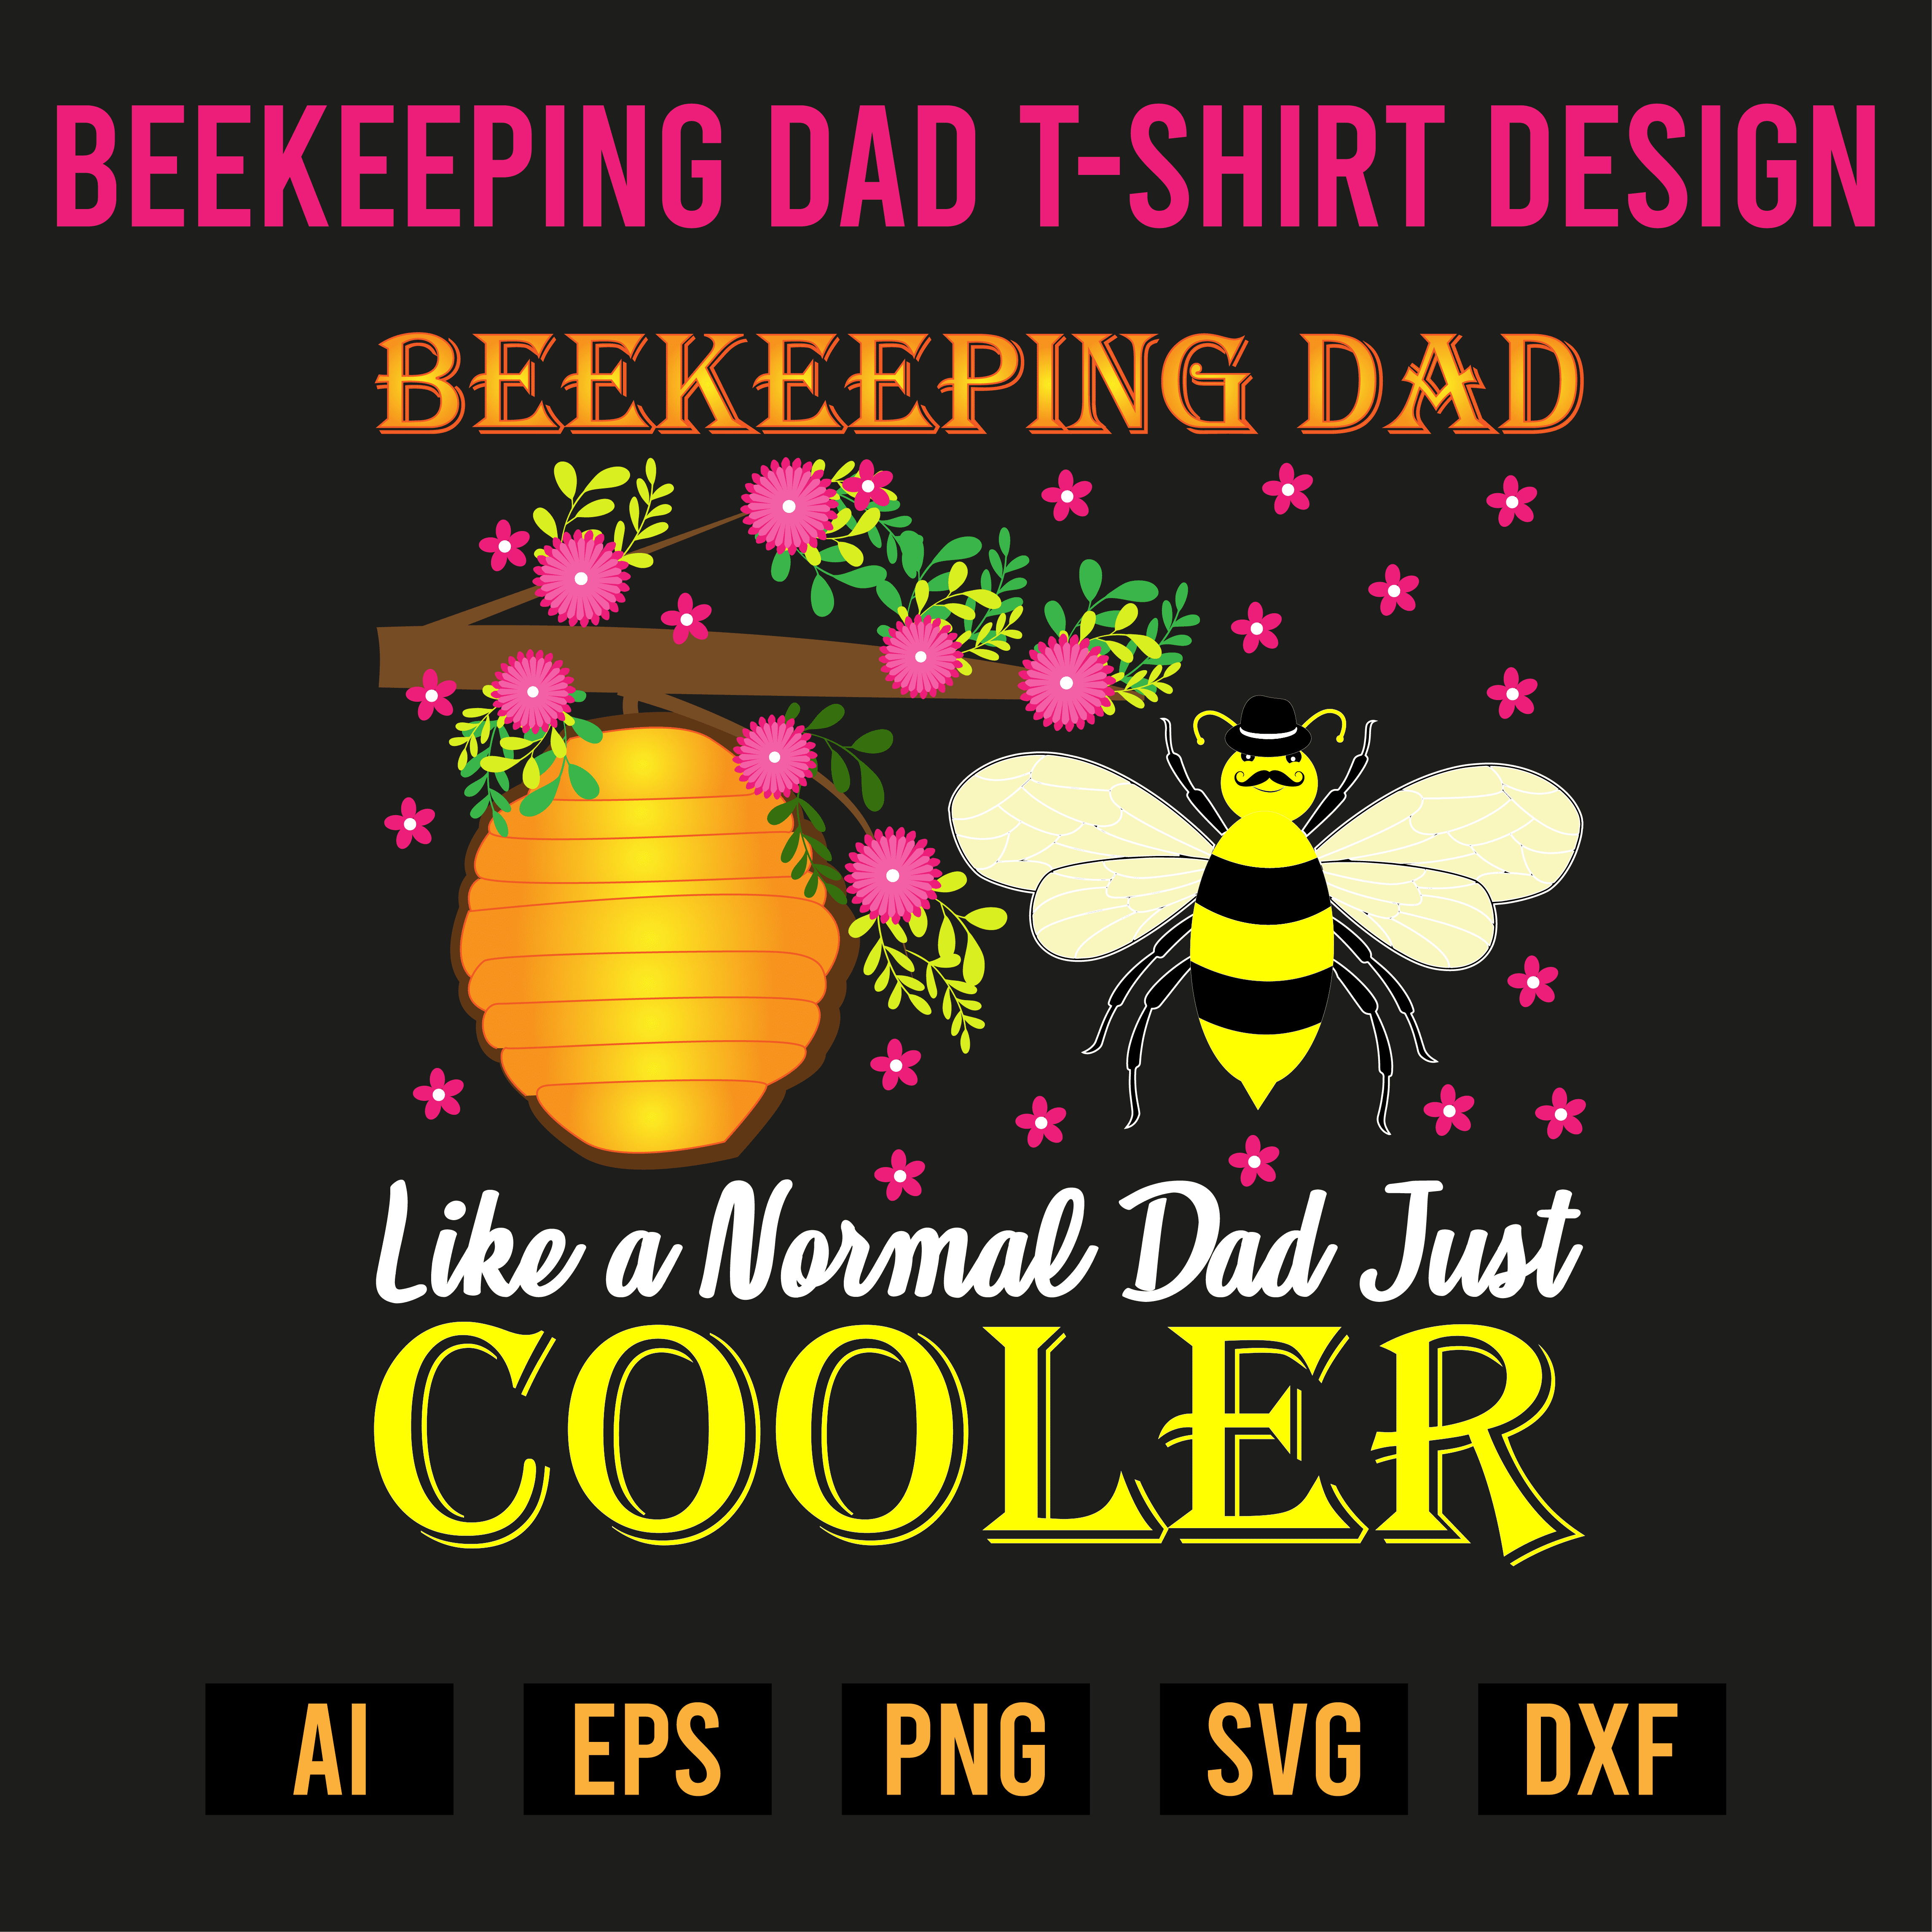 Beekeeping Dad T- Shirt Design cover image.